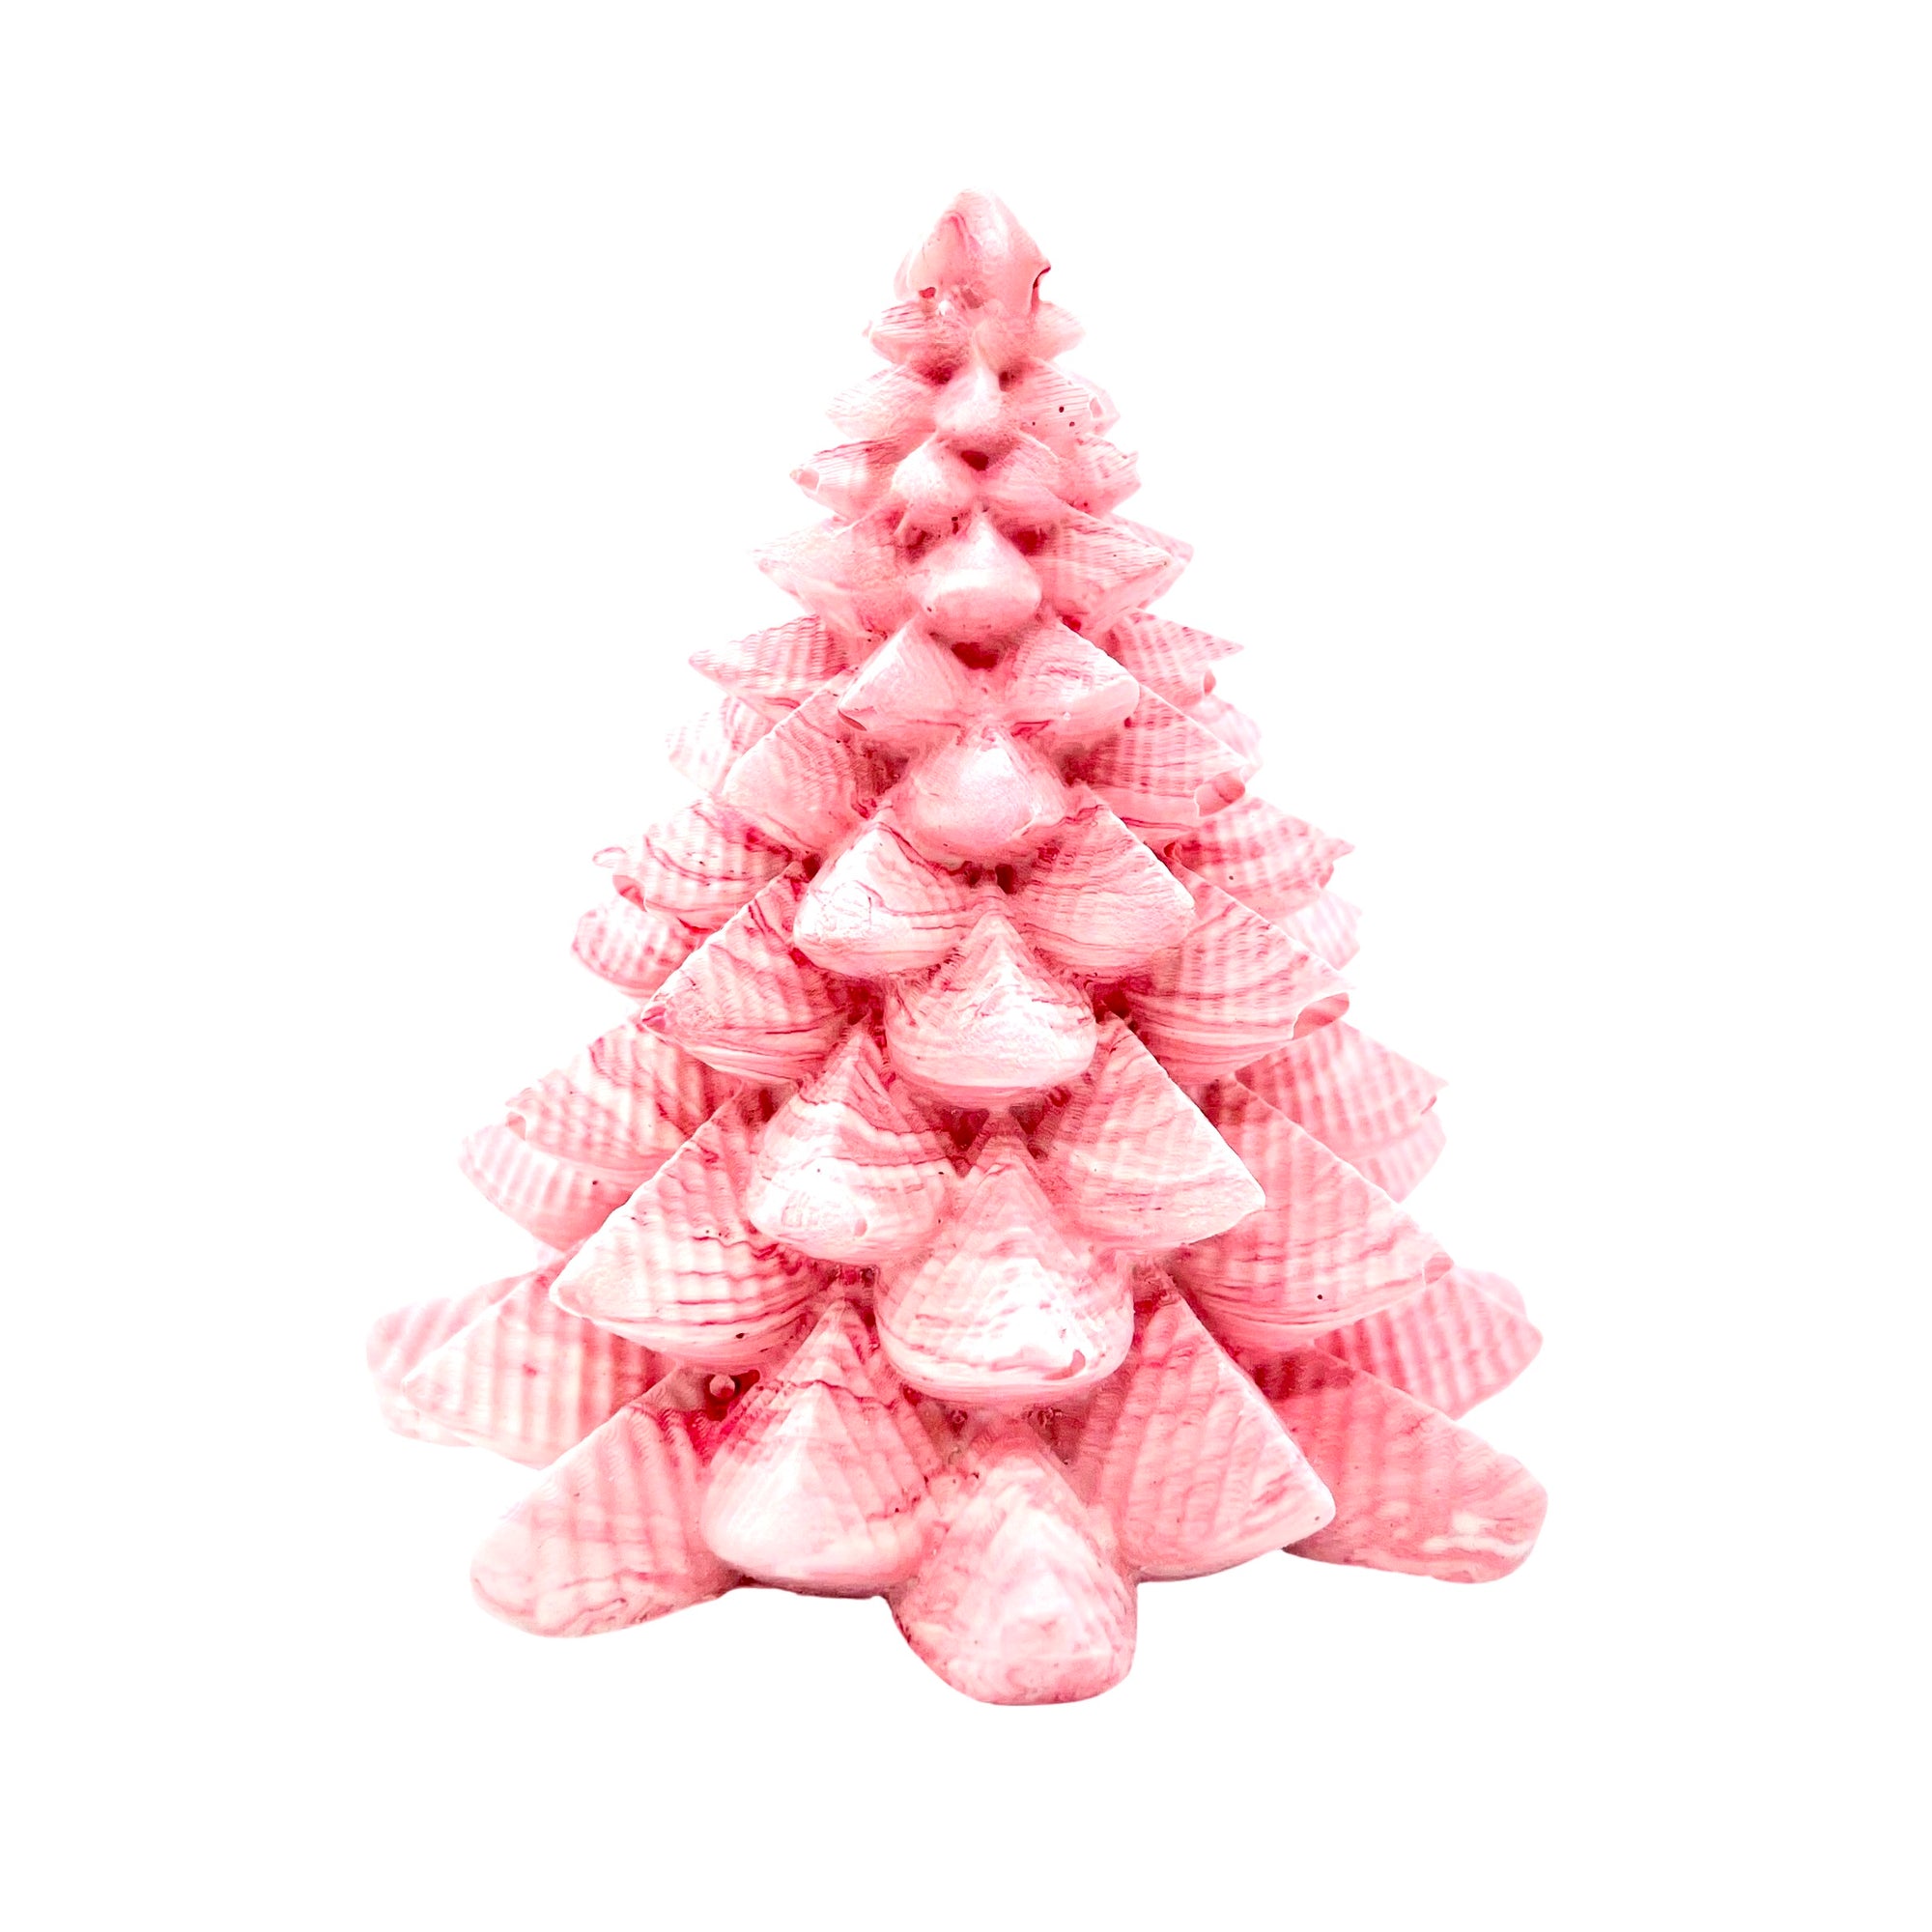 A small Jesmonite Christmas tree measuring 8.5cm tall and 7.5cm wide marbled with baby pink  pigment.